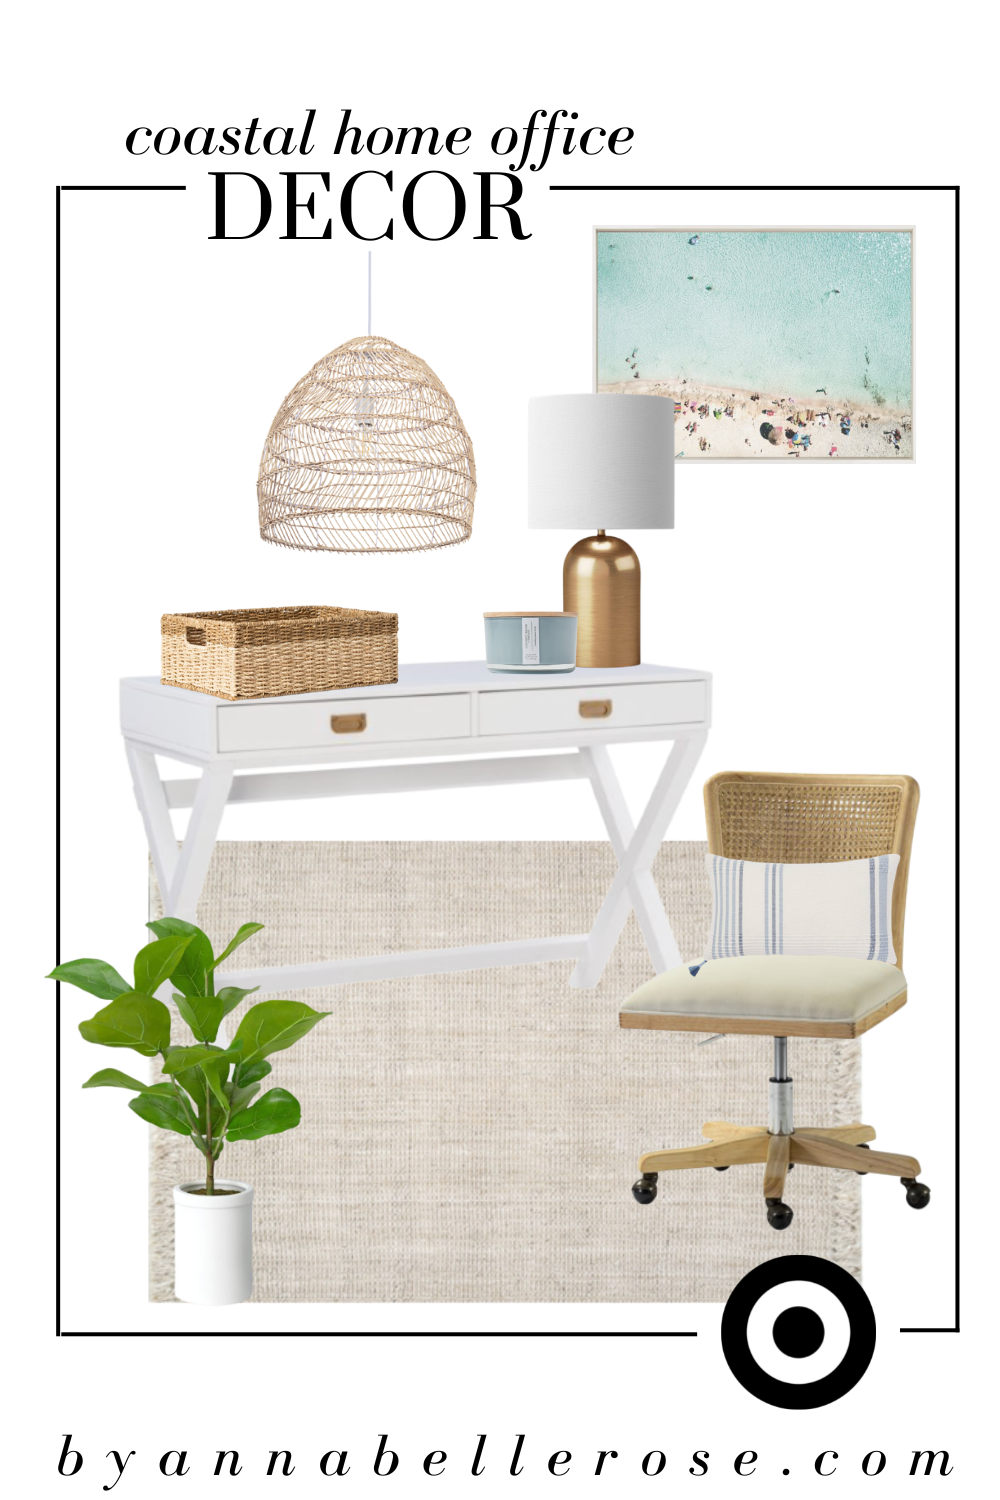 THE ABSOLUTE BEST COASTAL HOME OFFICE DECOR YOU MUST SEE